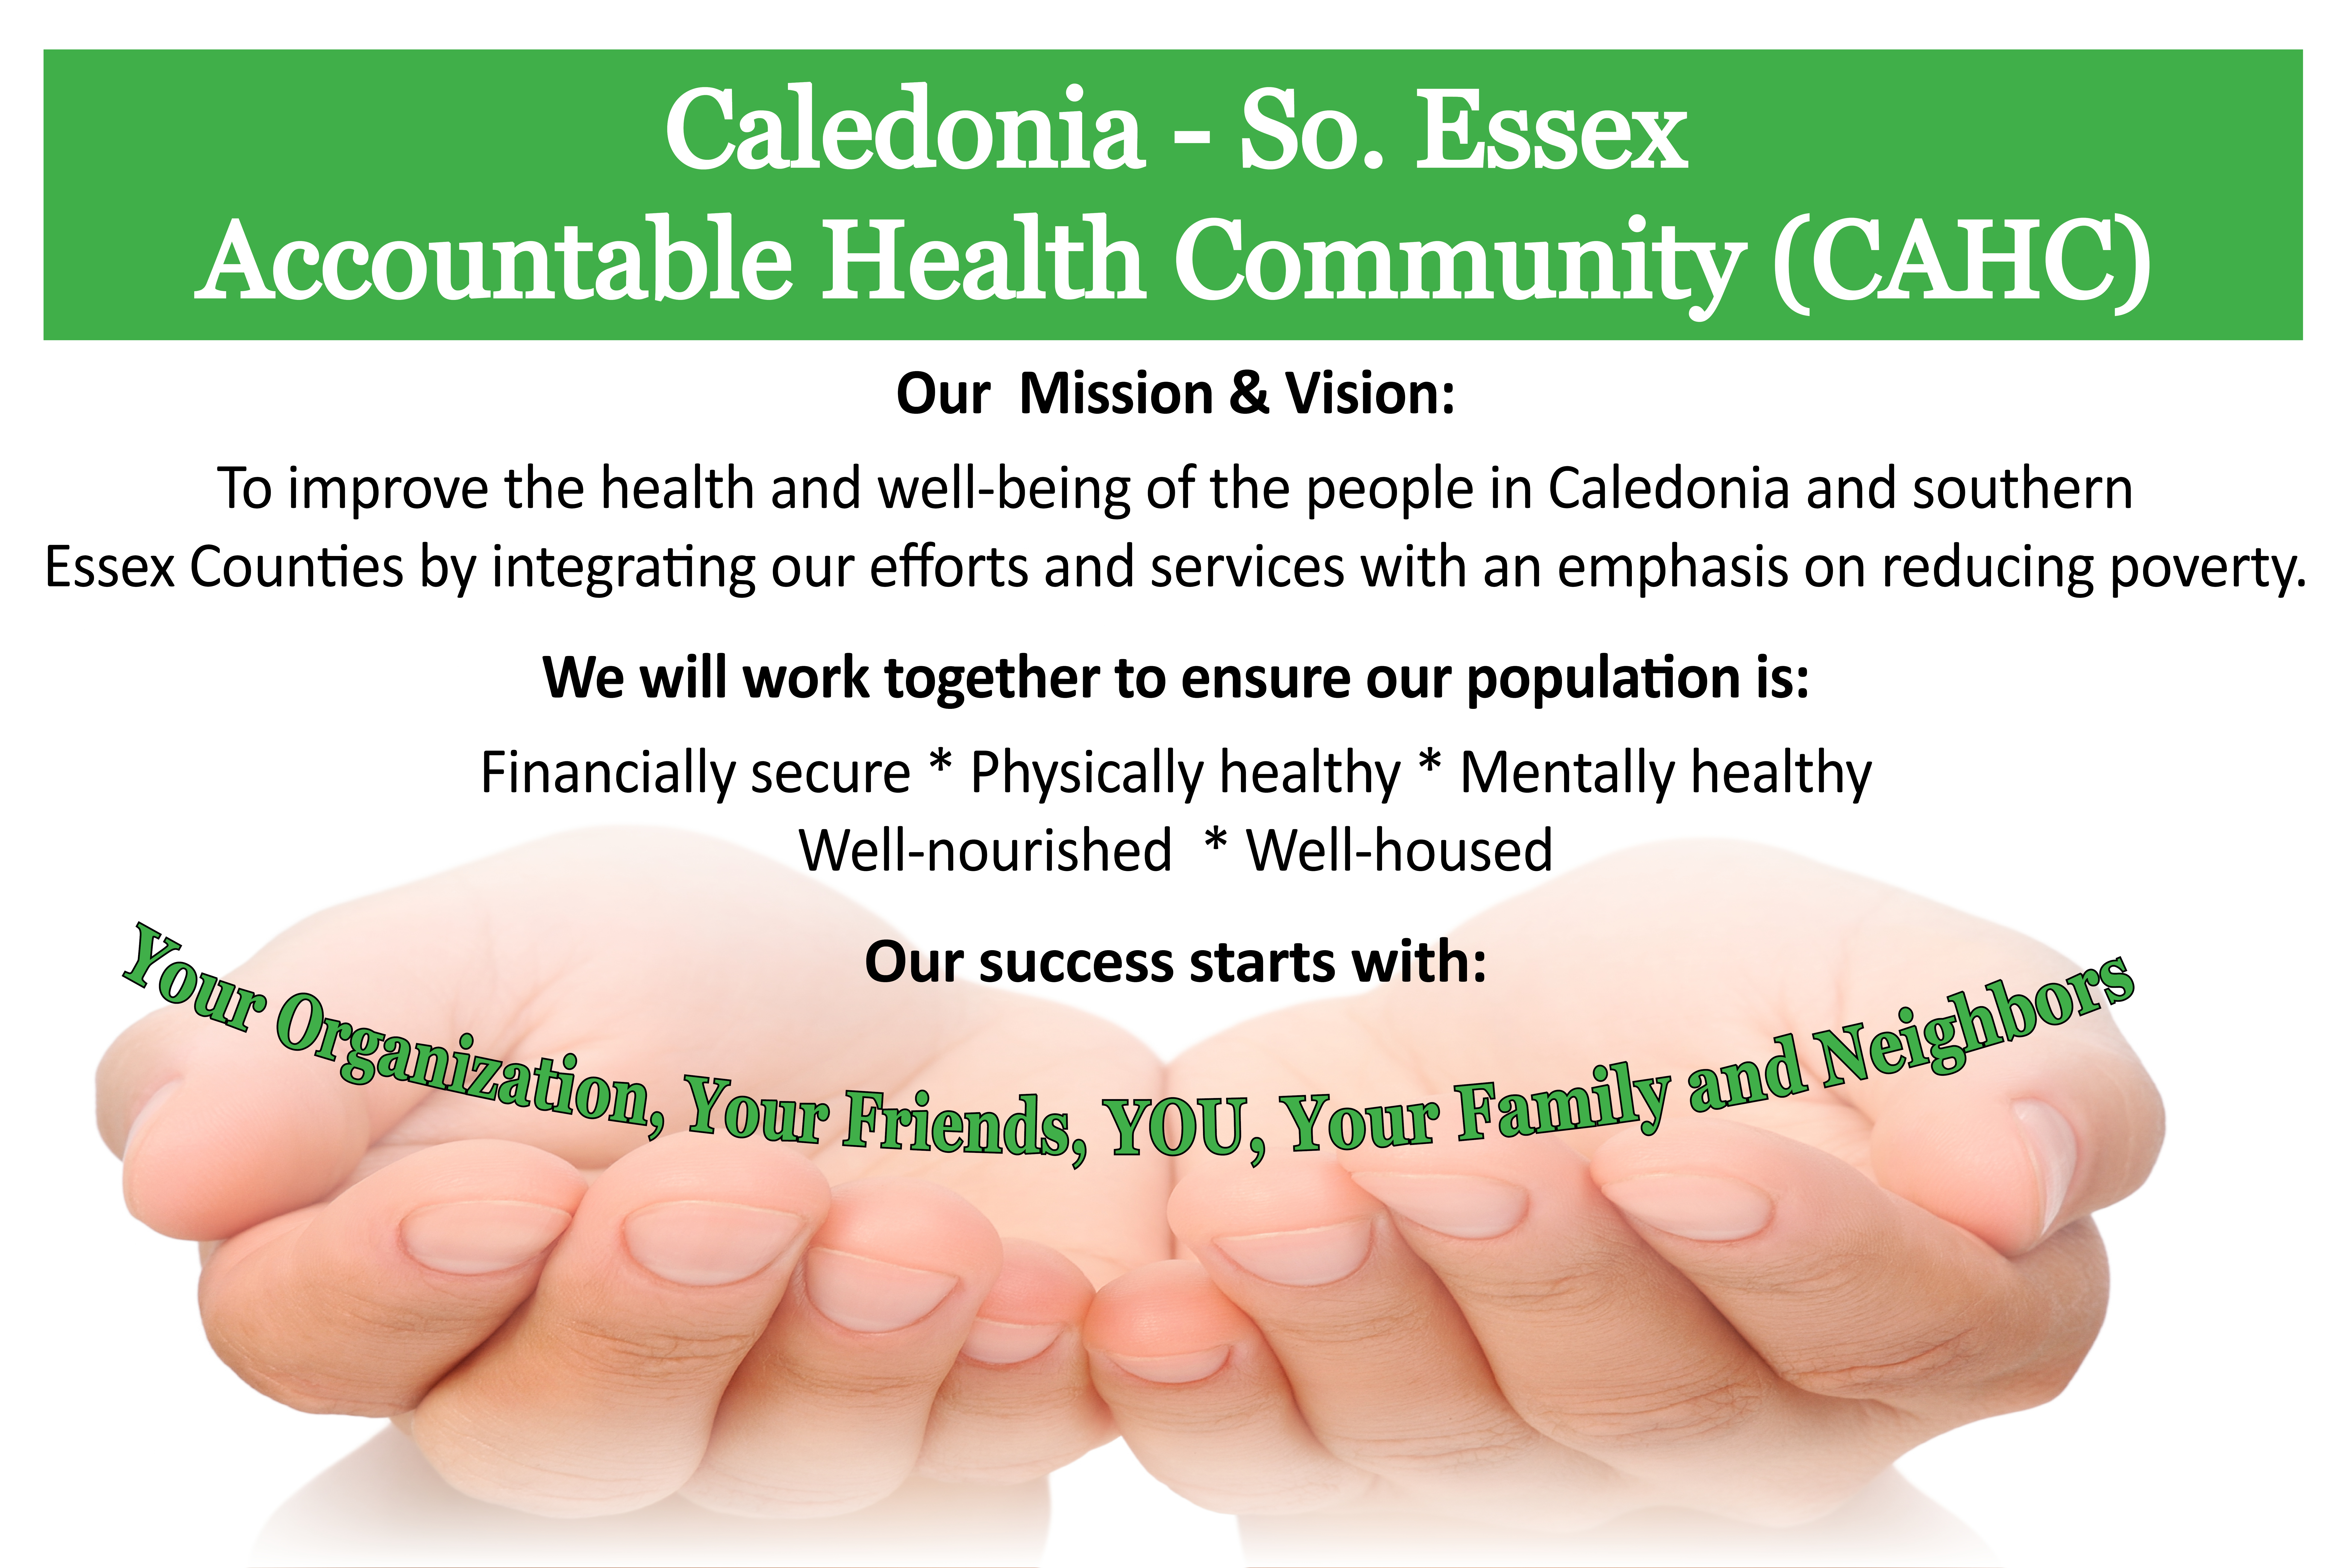 CAHC Caledonia South Essex Accountable Health Community